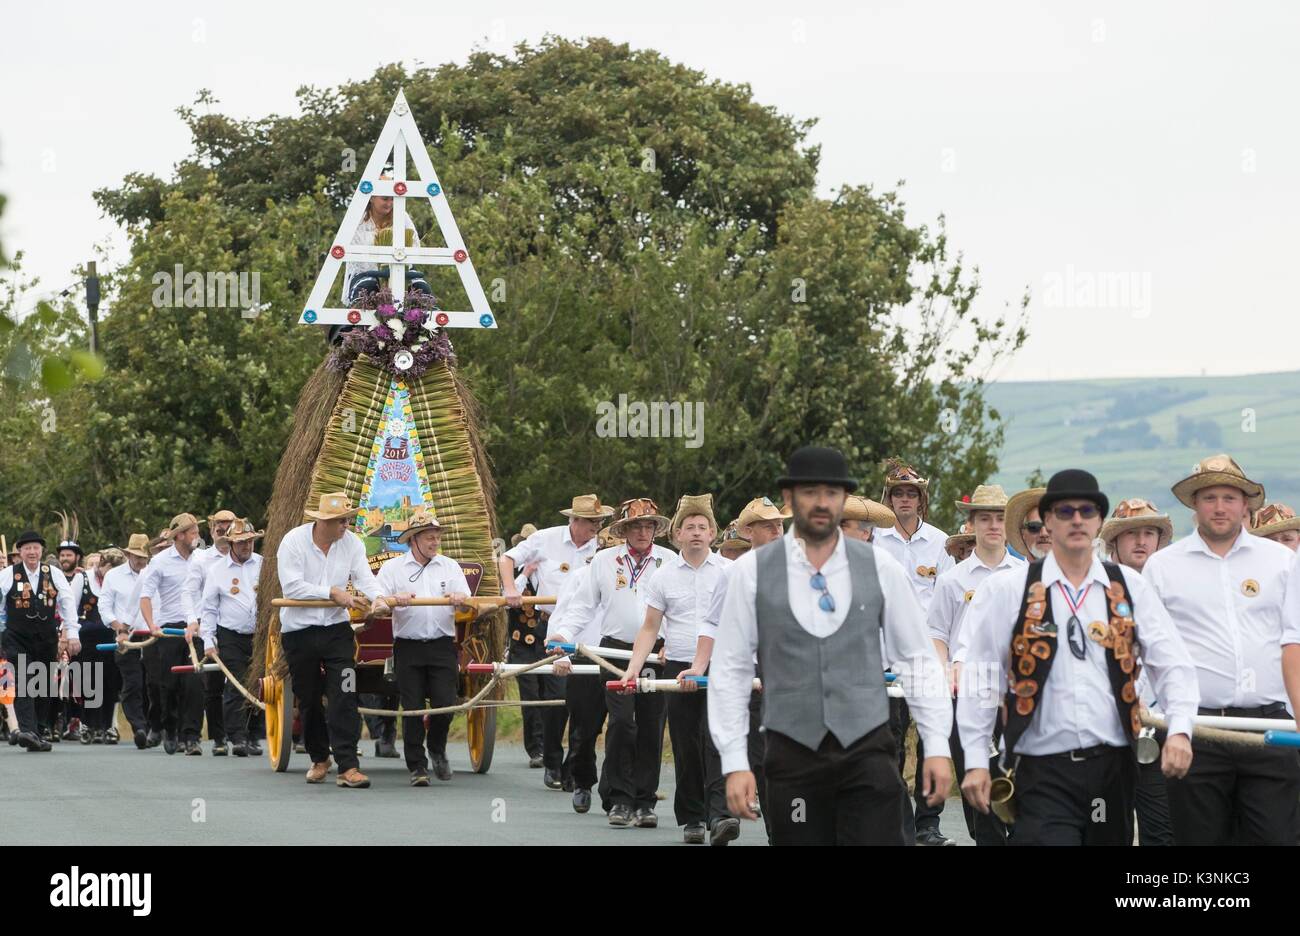 Members of a Rushbearing procession dressed in Panama hats and white shirts lead a sixteen foot high thatched rushcart, a tradition with origins dating back centuries, during the Sowerby Bridge Rushbearing Festival in Yorkshire. Stock Photo